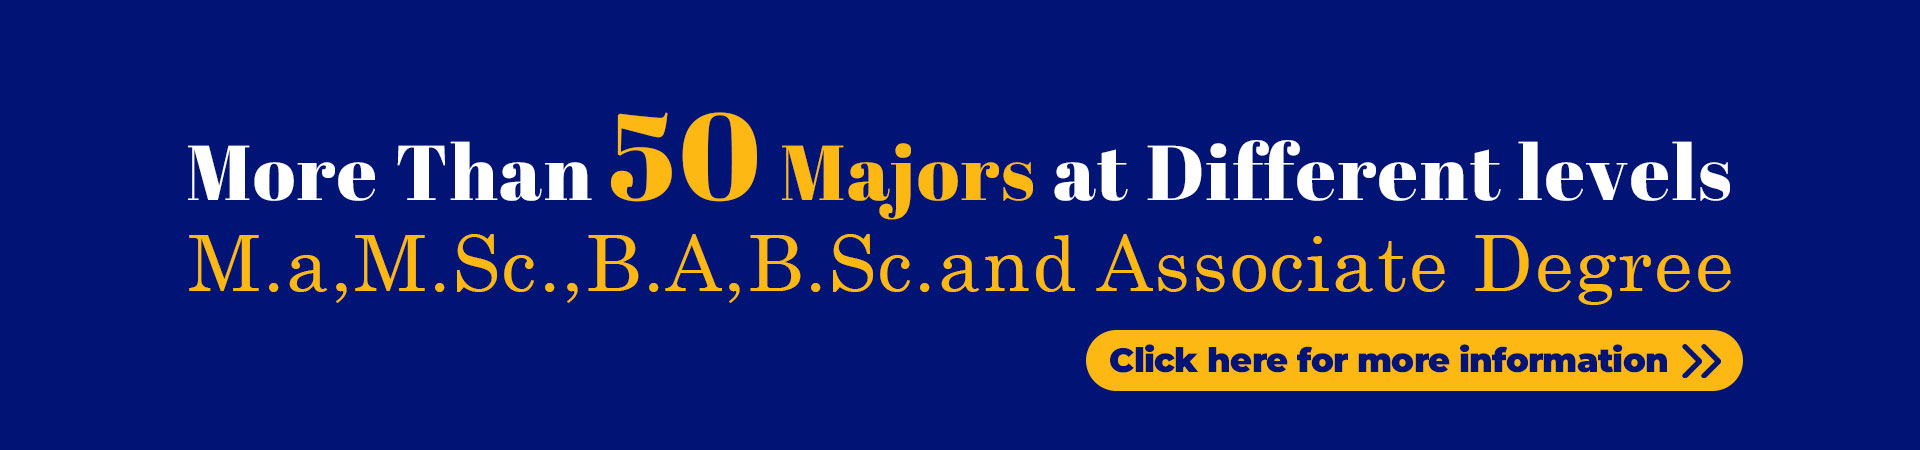 More than 50 majors at different levels